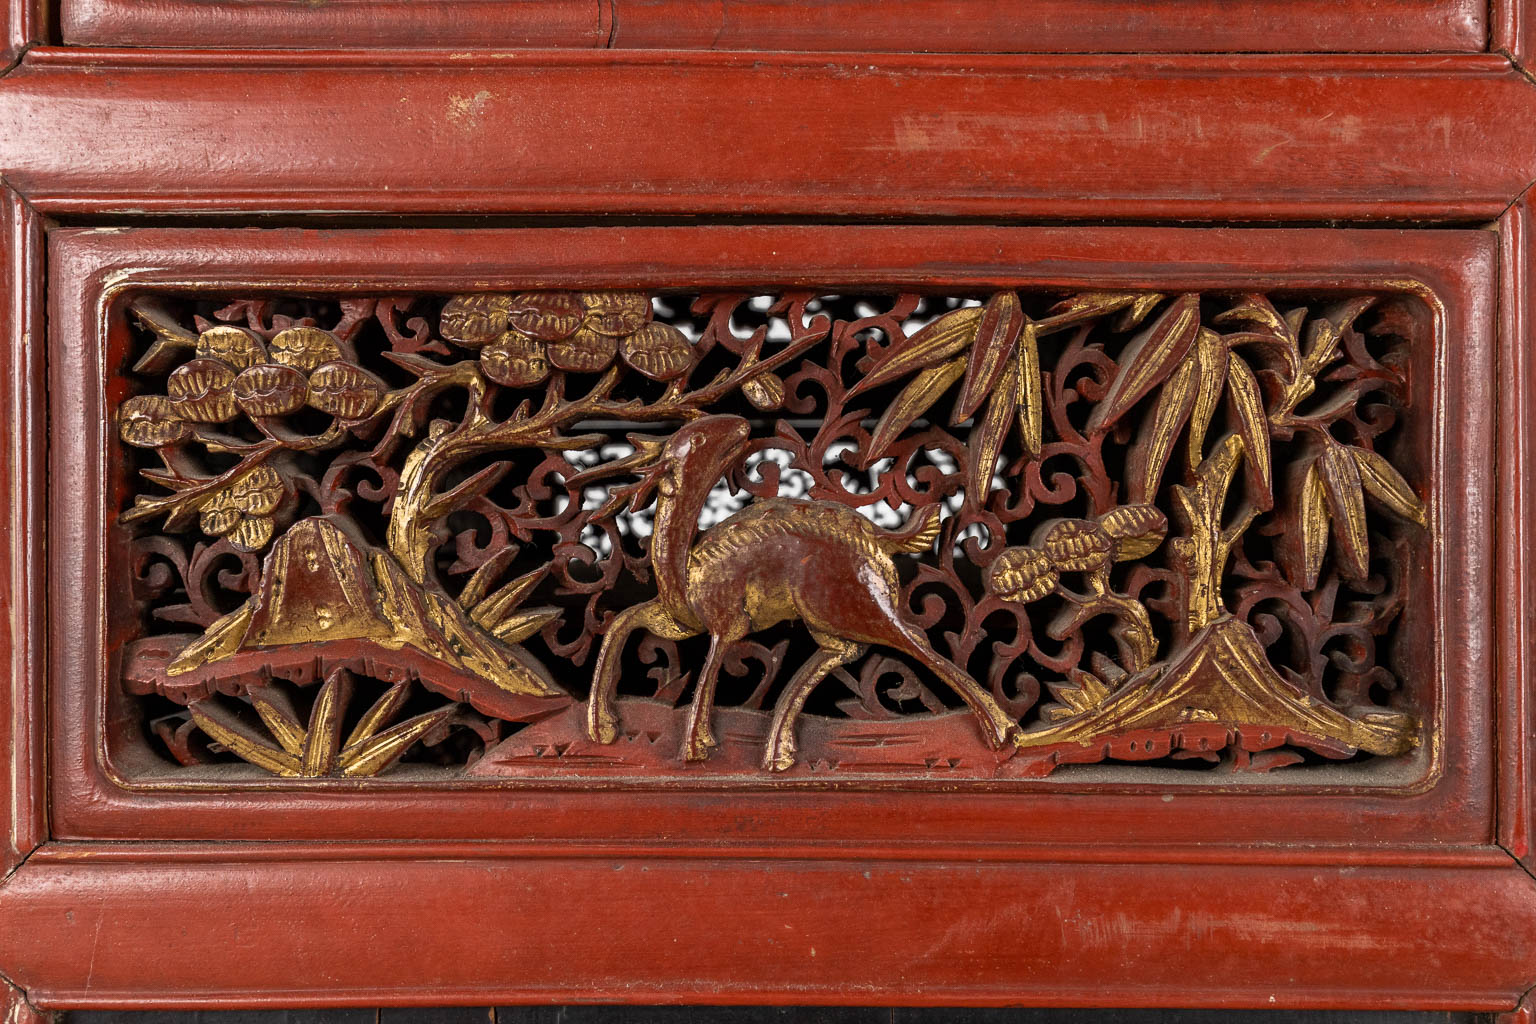 A Chinese cabinet with finely sculptured lacquered and gilt wood panels, 19th/20th C. (D:47 x W:73 x H:173 cm)